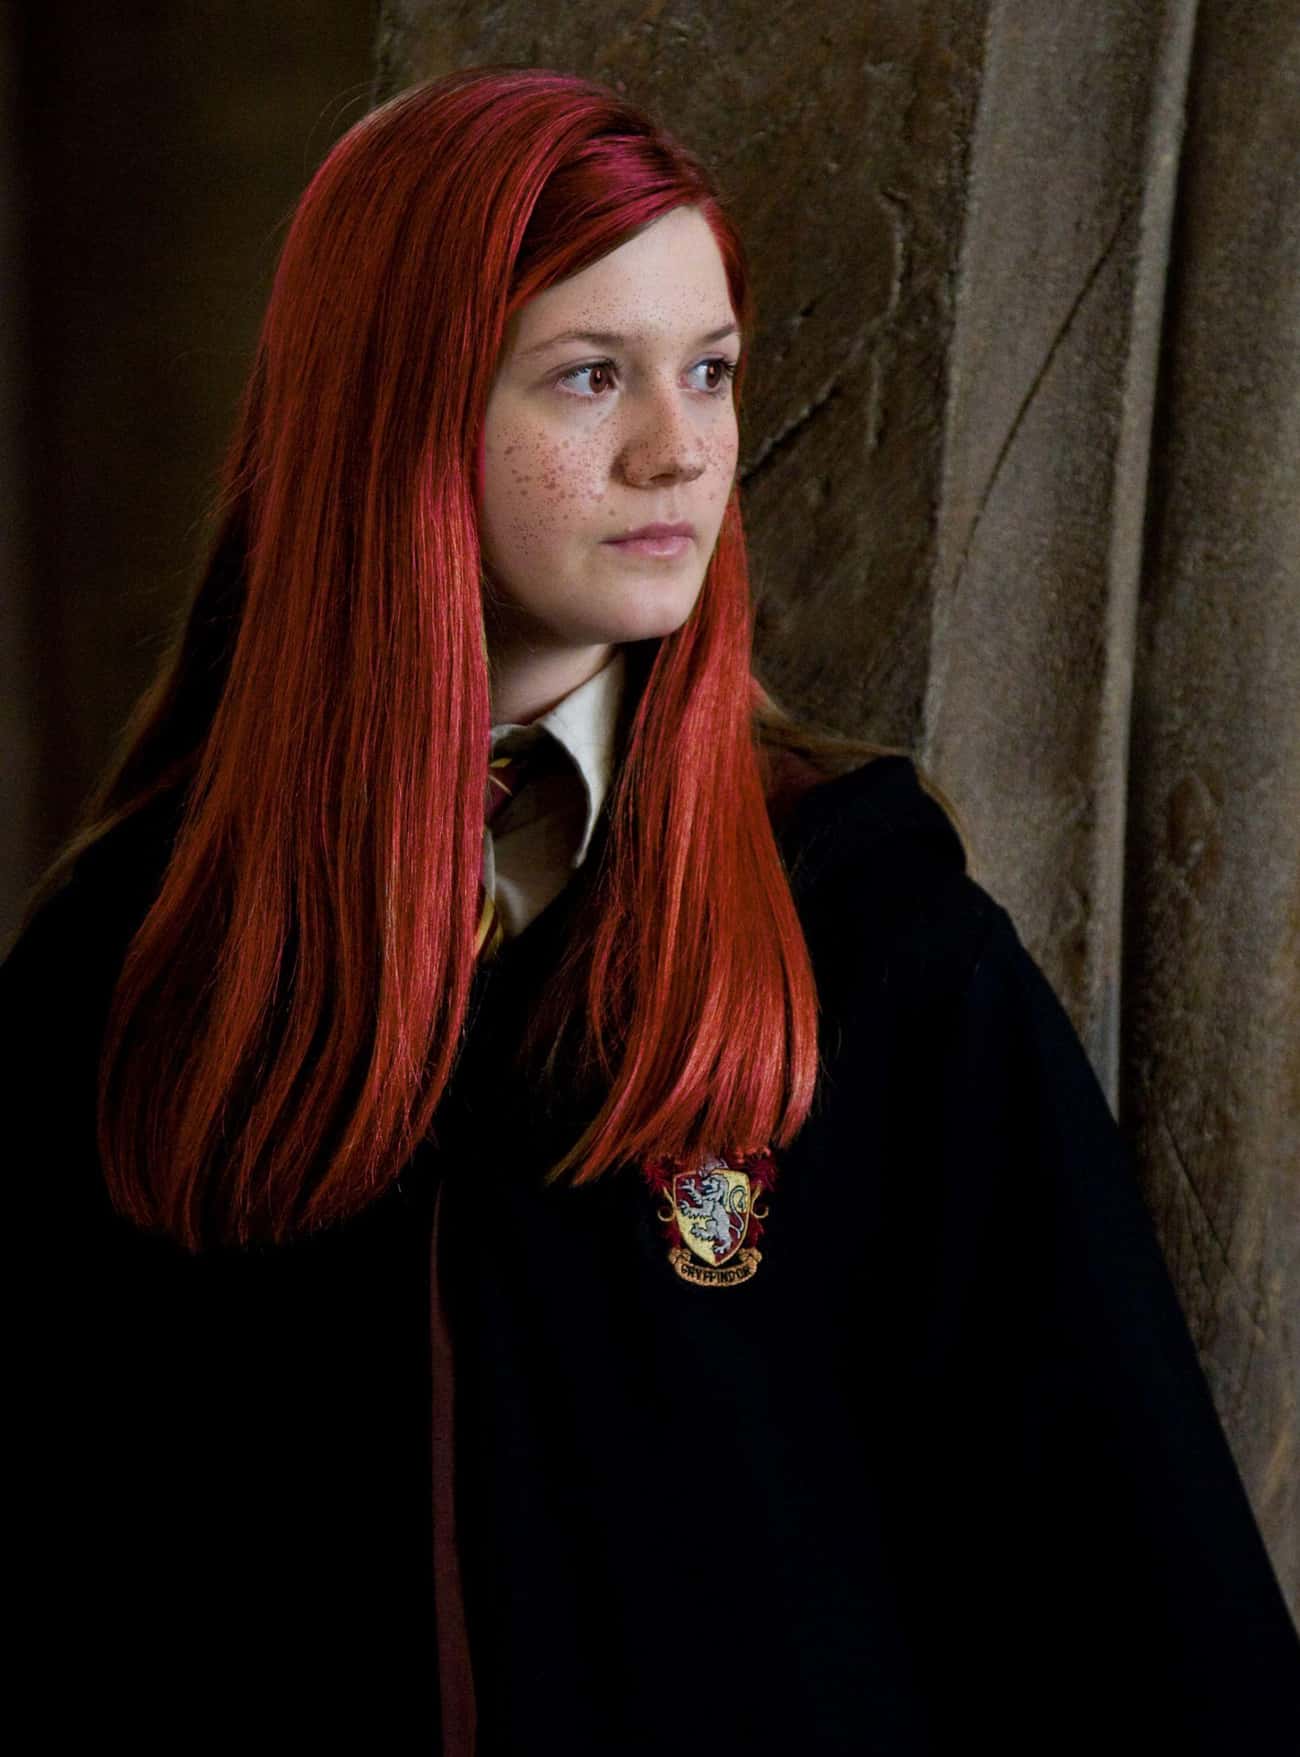 Ginny Weasley In The Books: Fire Hair With Freckles And Bright Brown Eyes